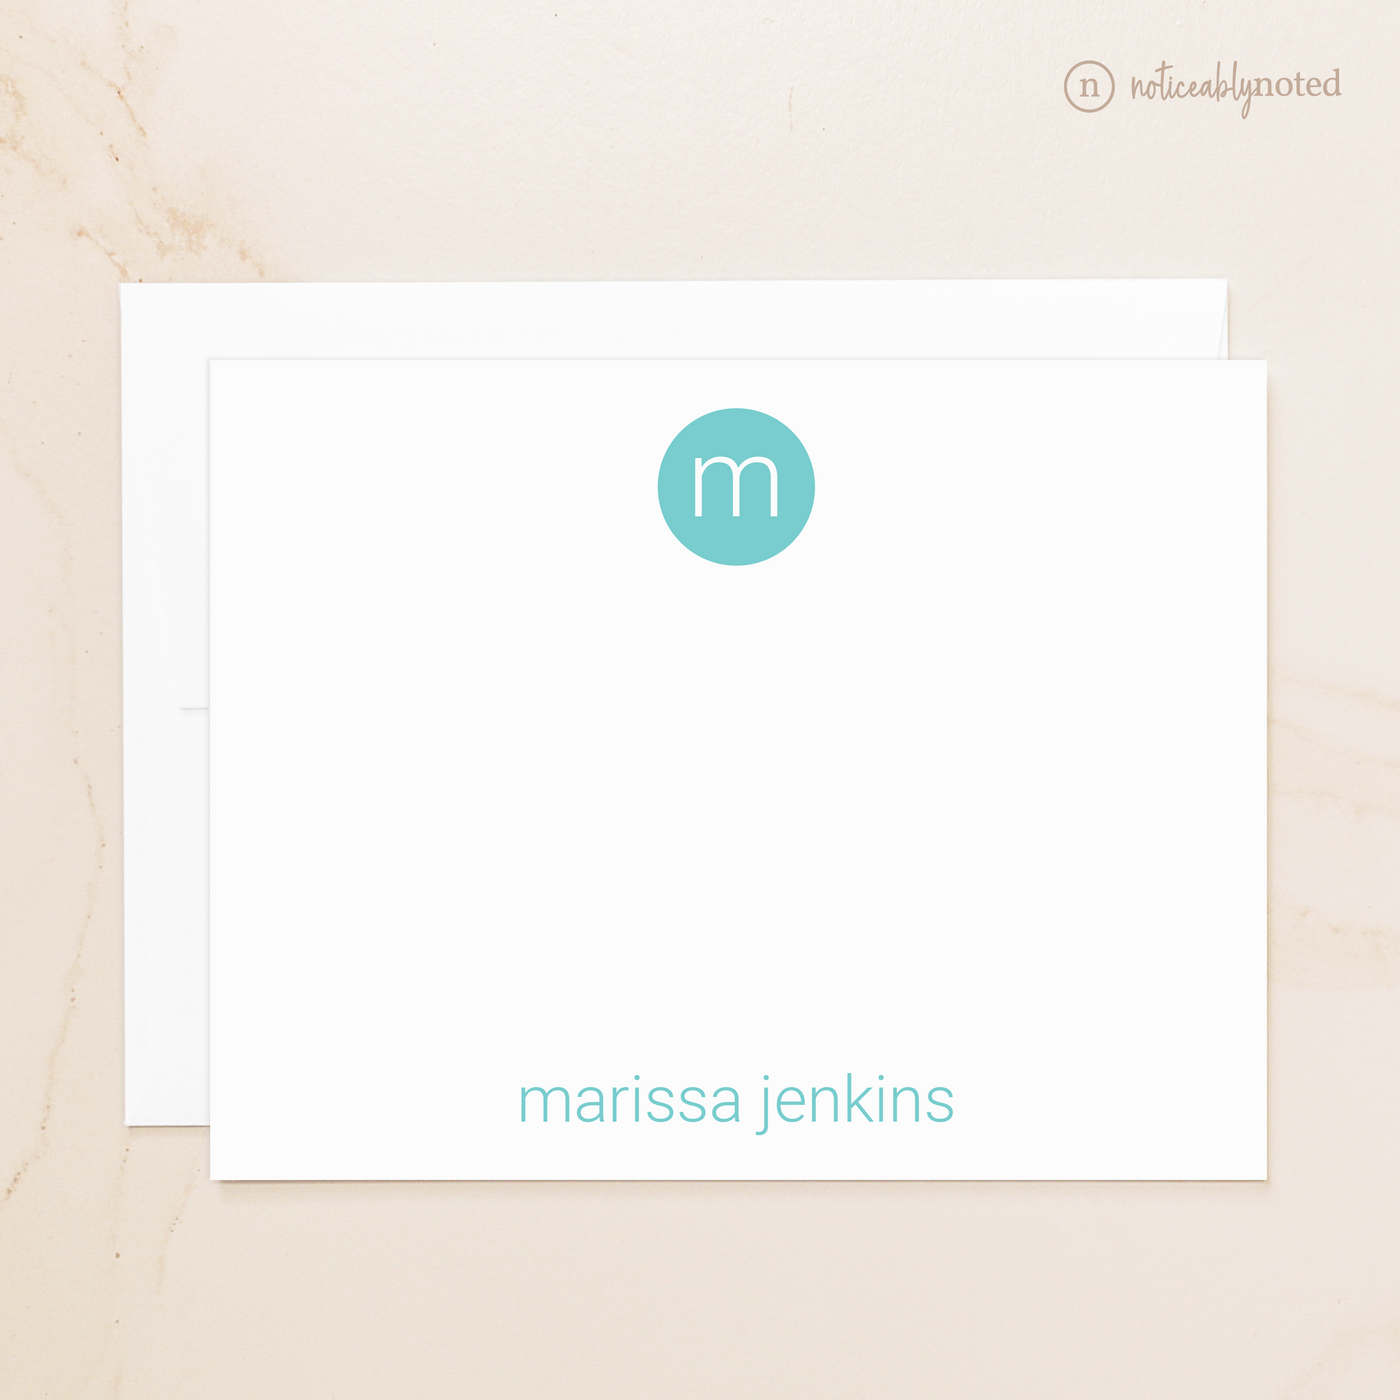 Monogram Note Cards | Noticeably Noted